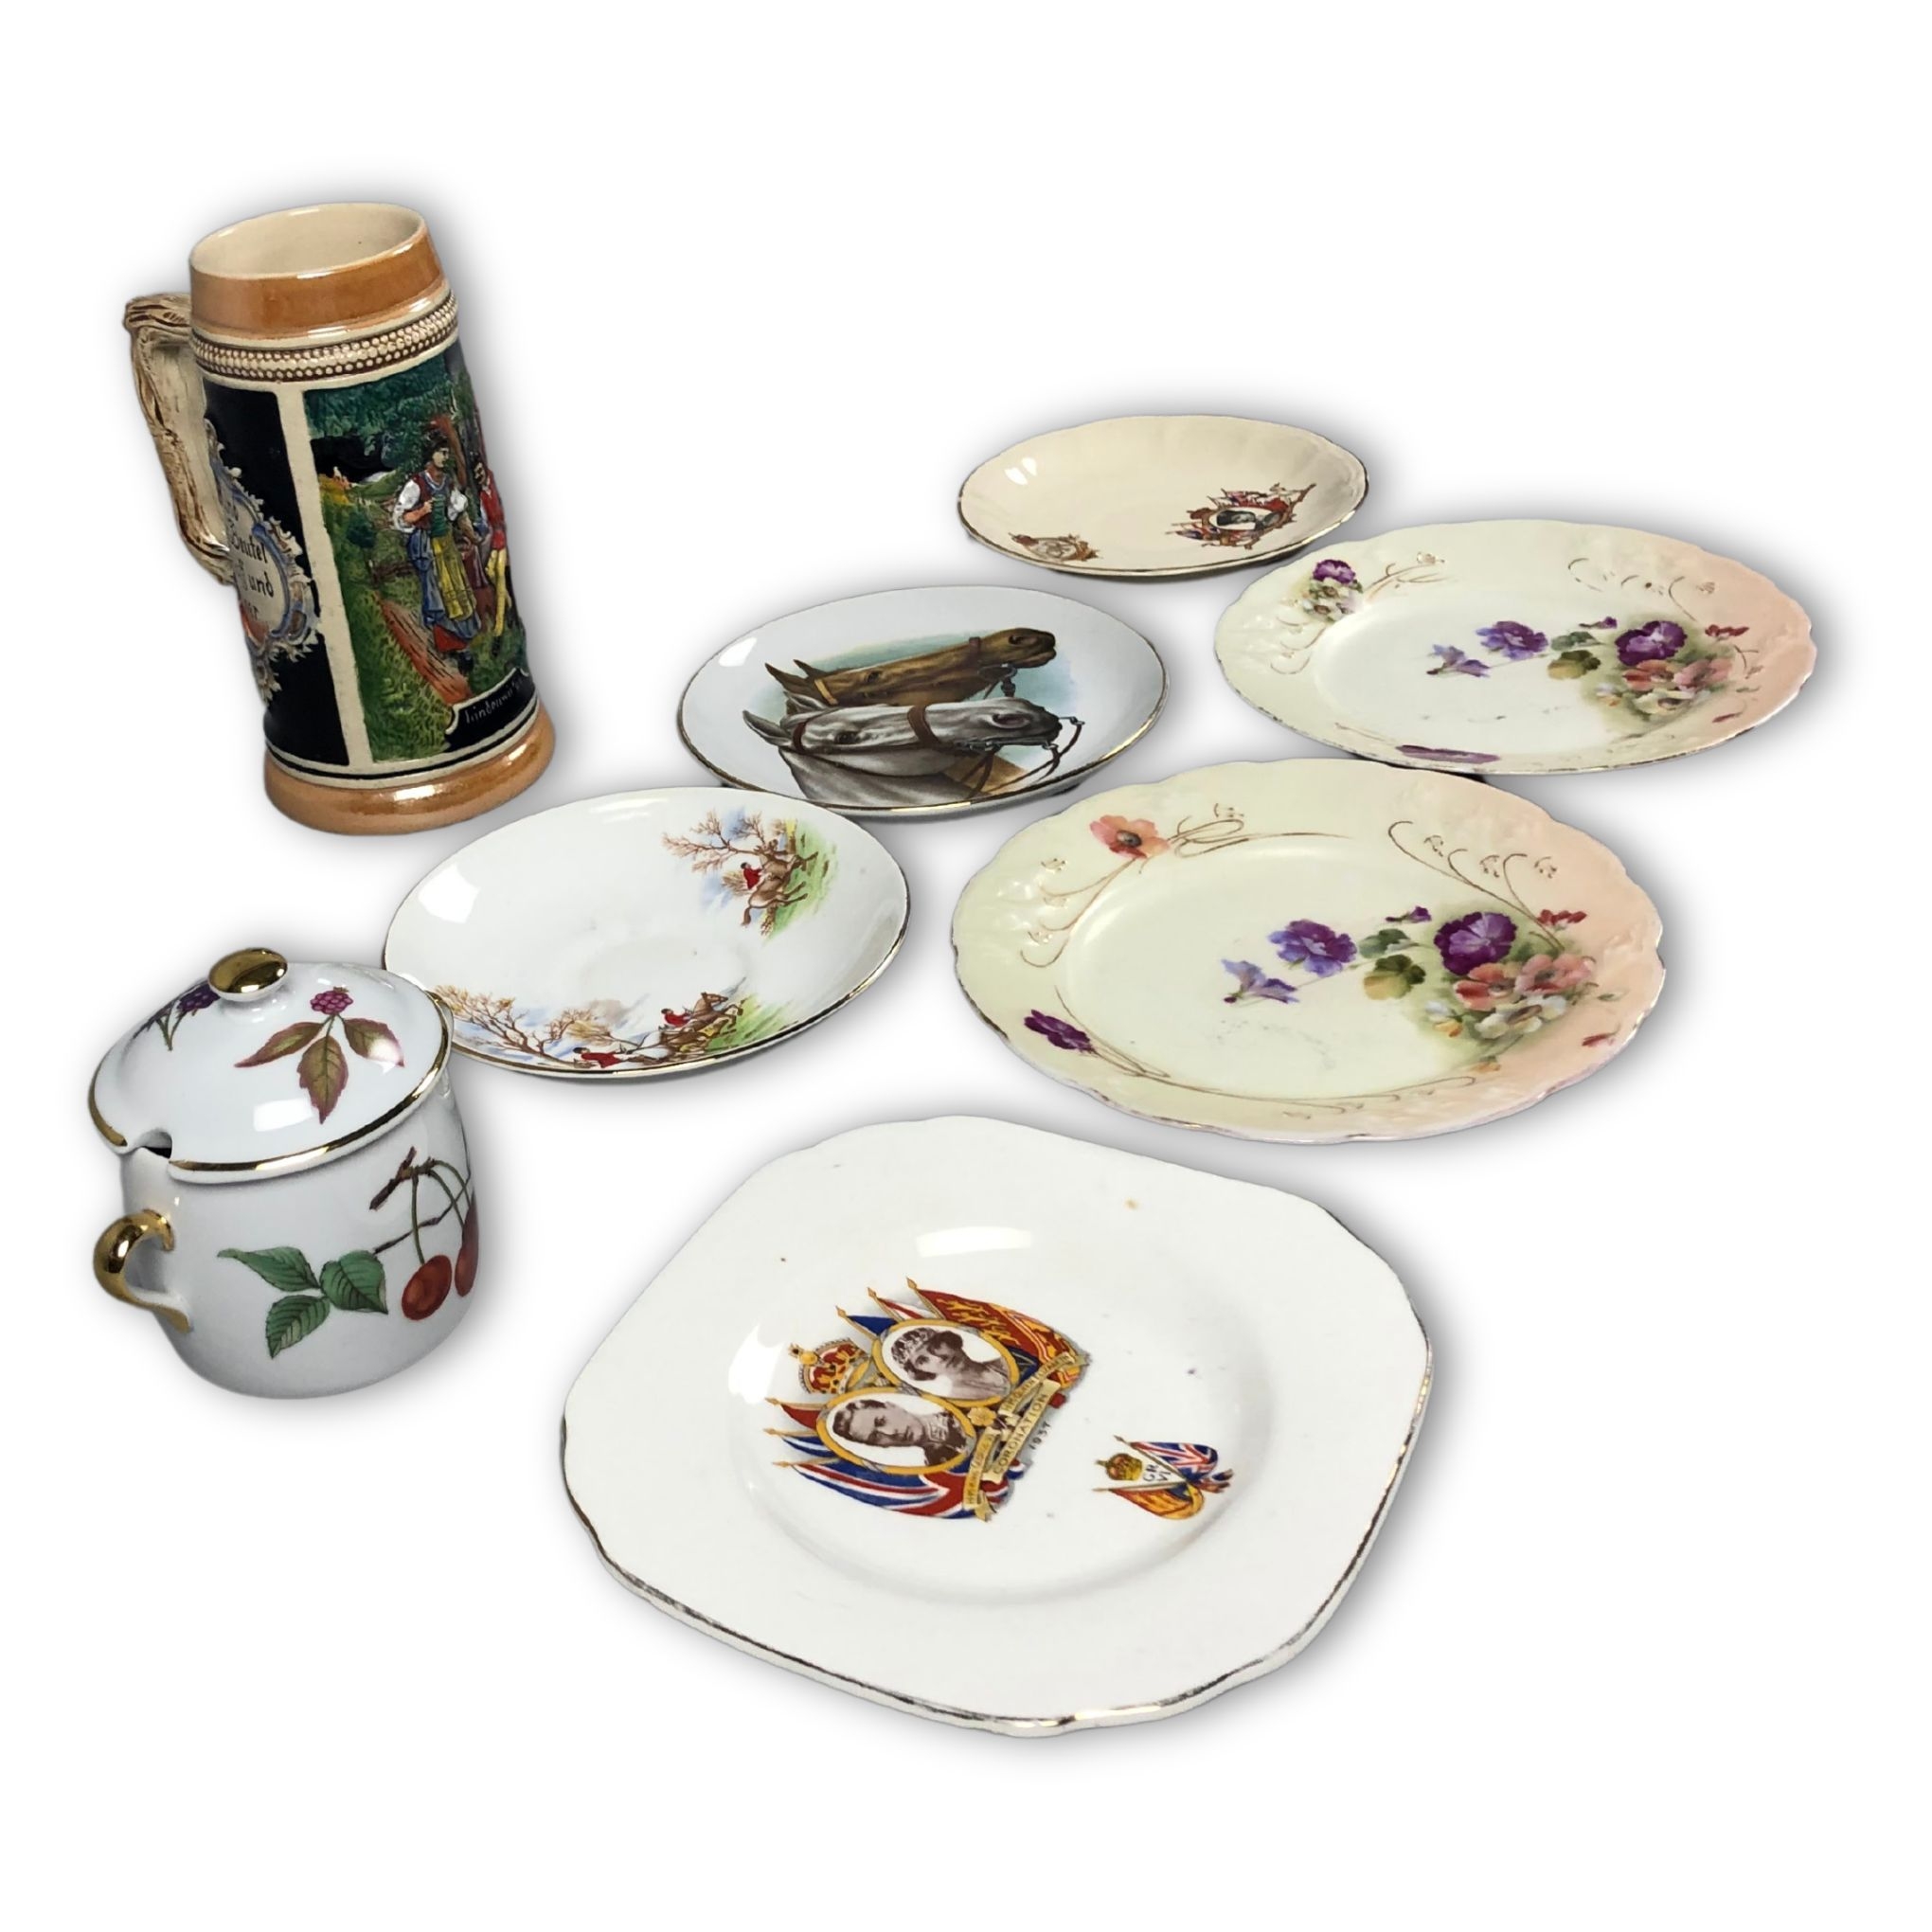 Collection of Plates and Collectable Mug  - Image 4 of 6